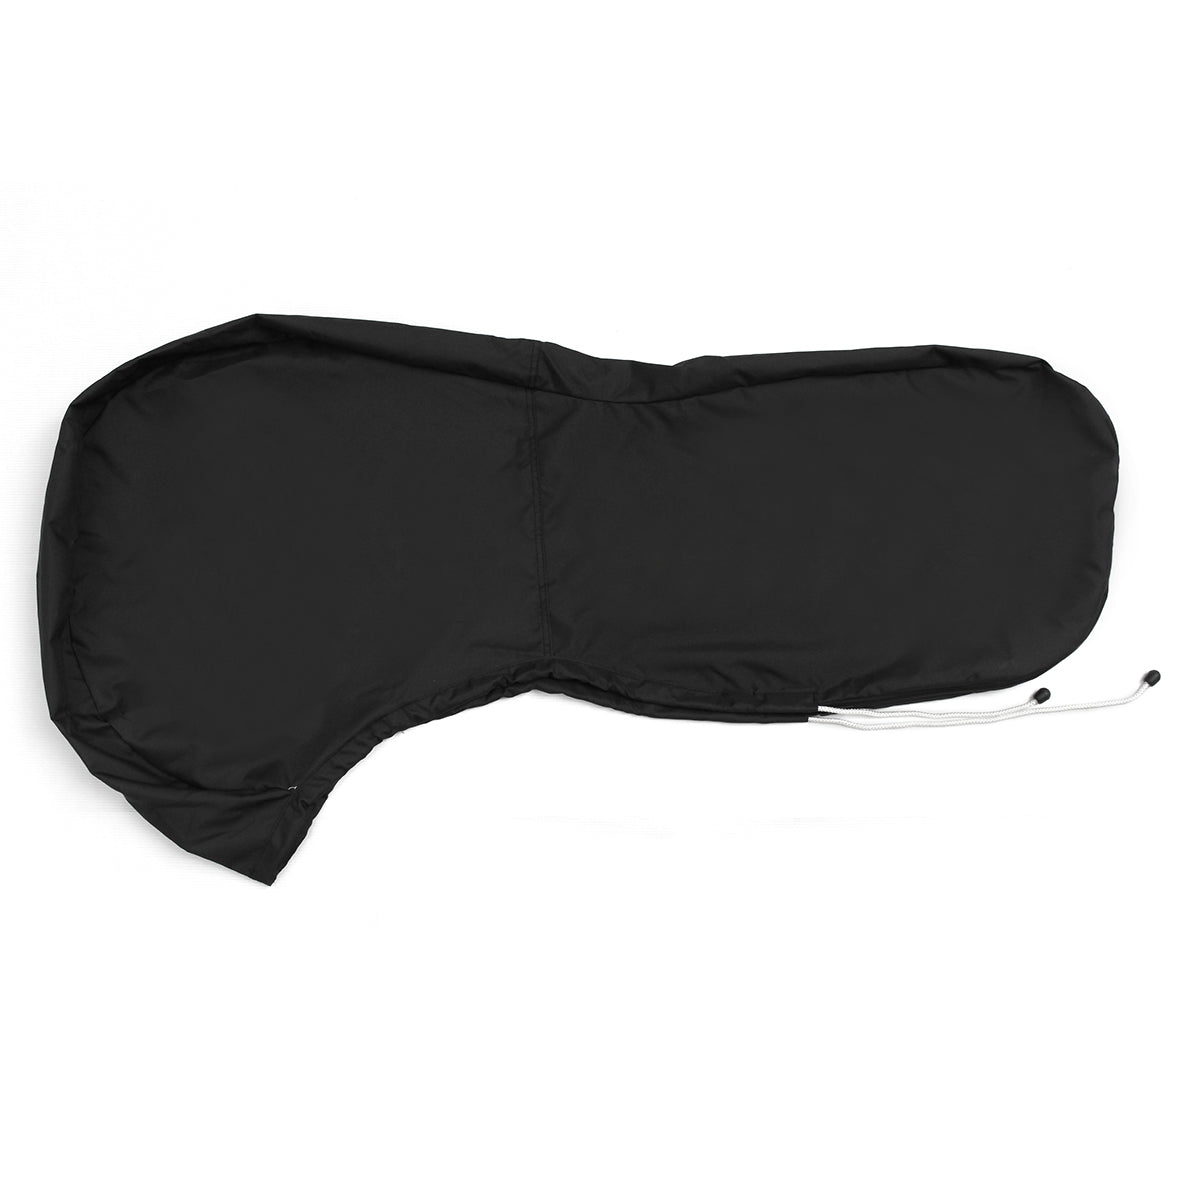 Dark Slate Gray 600D Black Boat Full Outboard Engine Cover Fit For 15-20HP Motor Waterproof